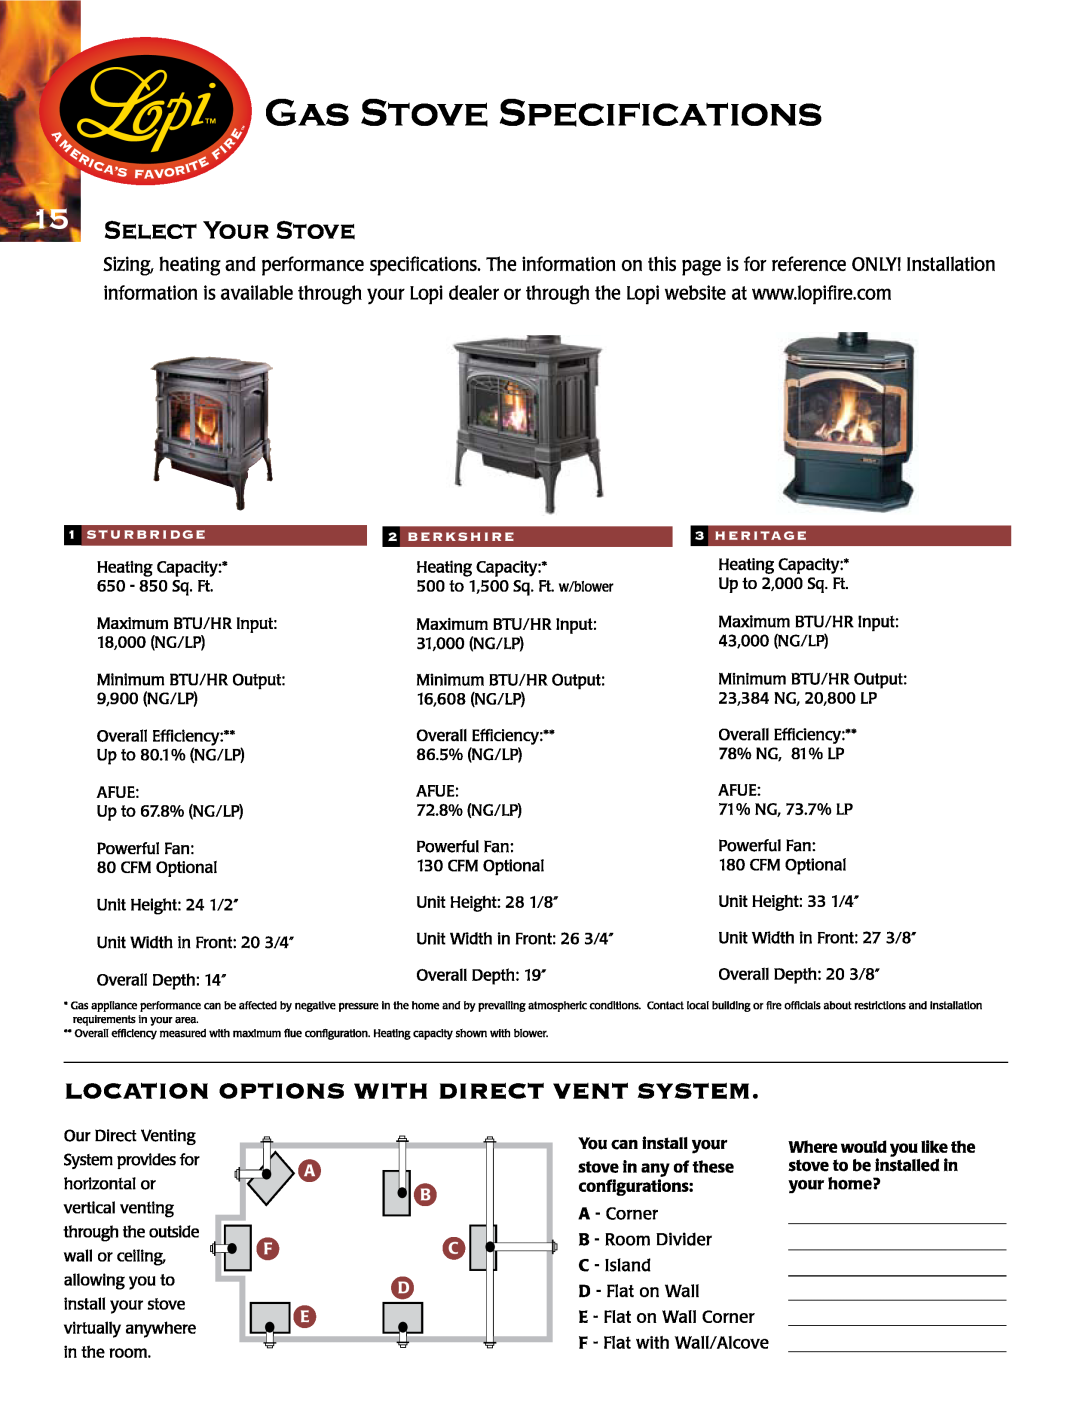 Lopi Gas Stove And Fireplace manual Gas Stove Specifications, 15SELECT YOUR STOVE 